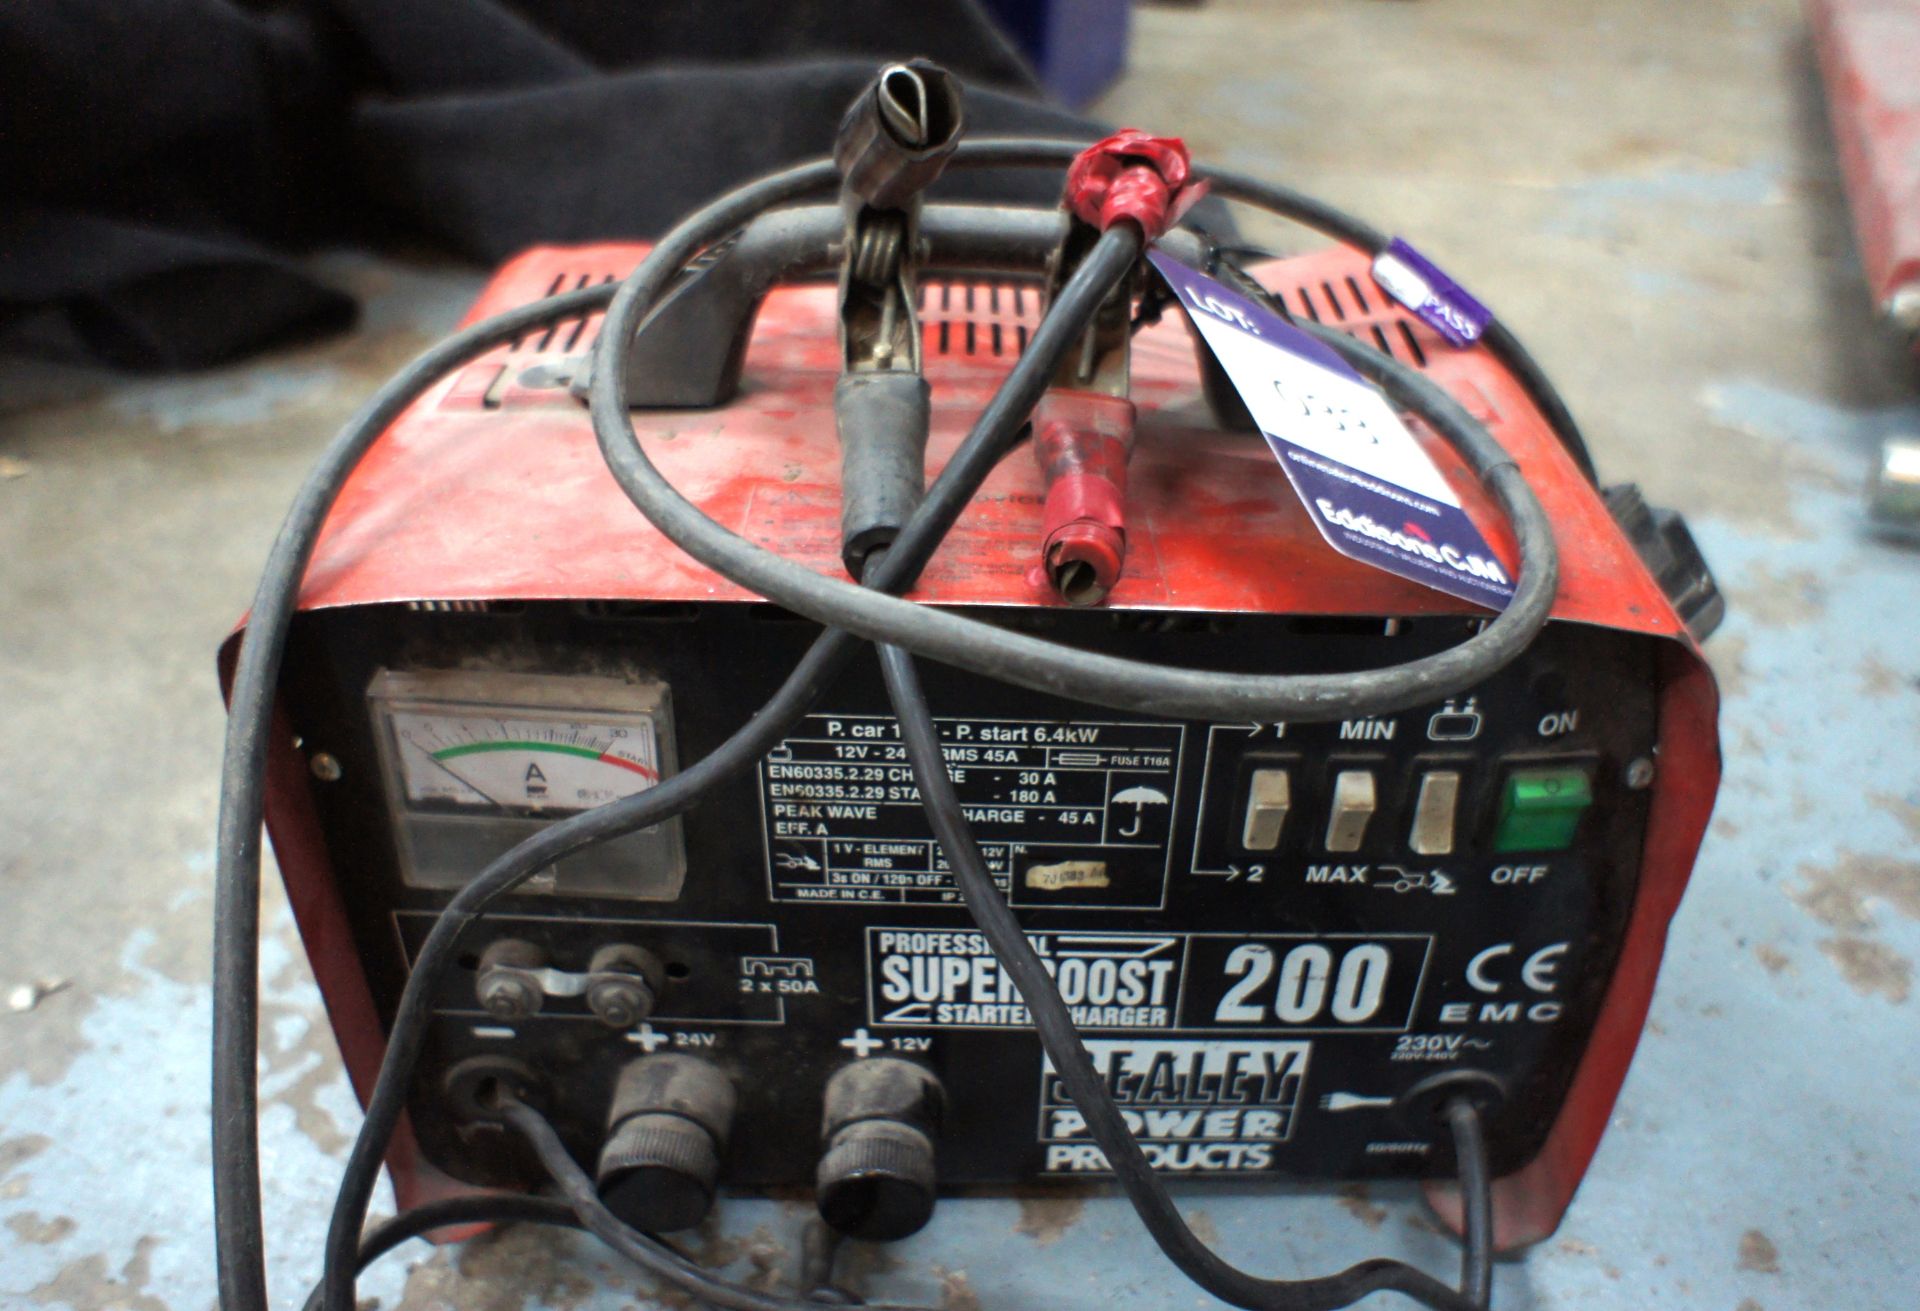 Sealey Super Boost 200 starter/charger - Image 2 of 2